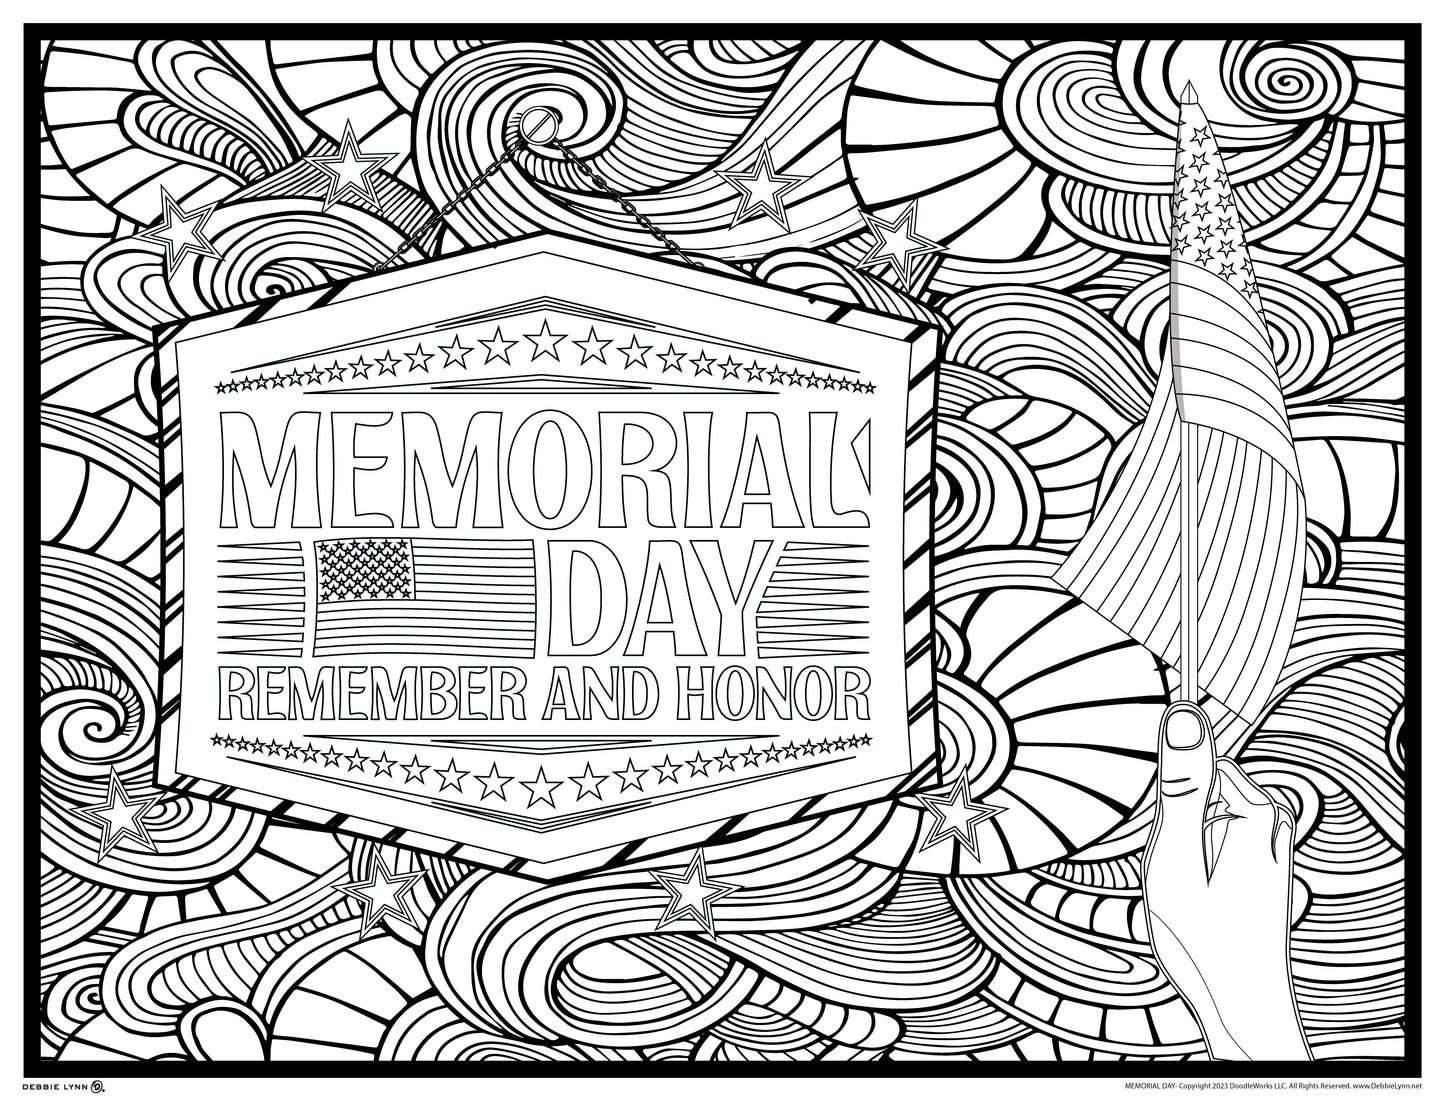 Memorial Day Personalized Giant Coloring Poster 46x60"